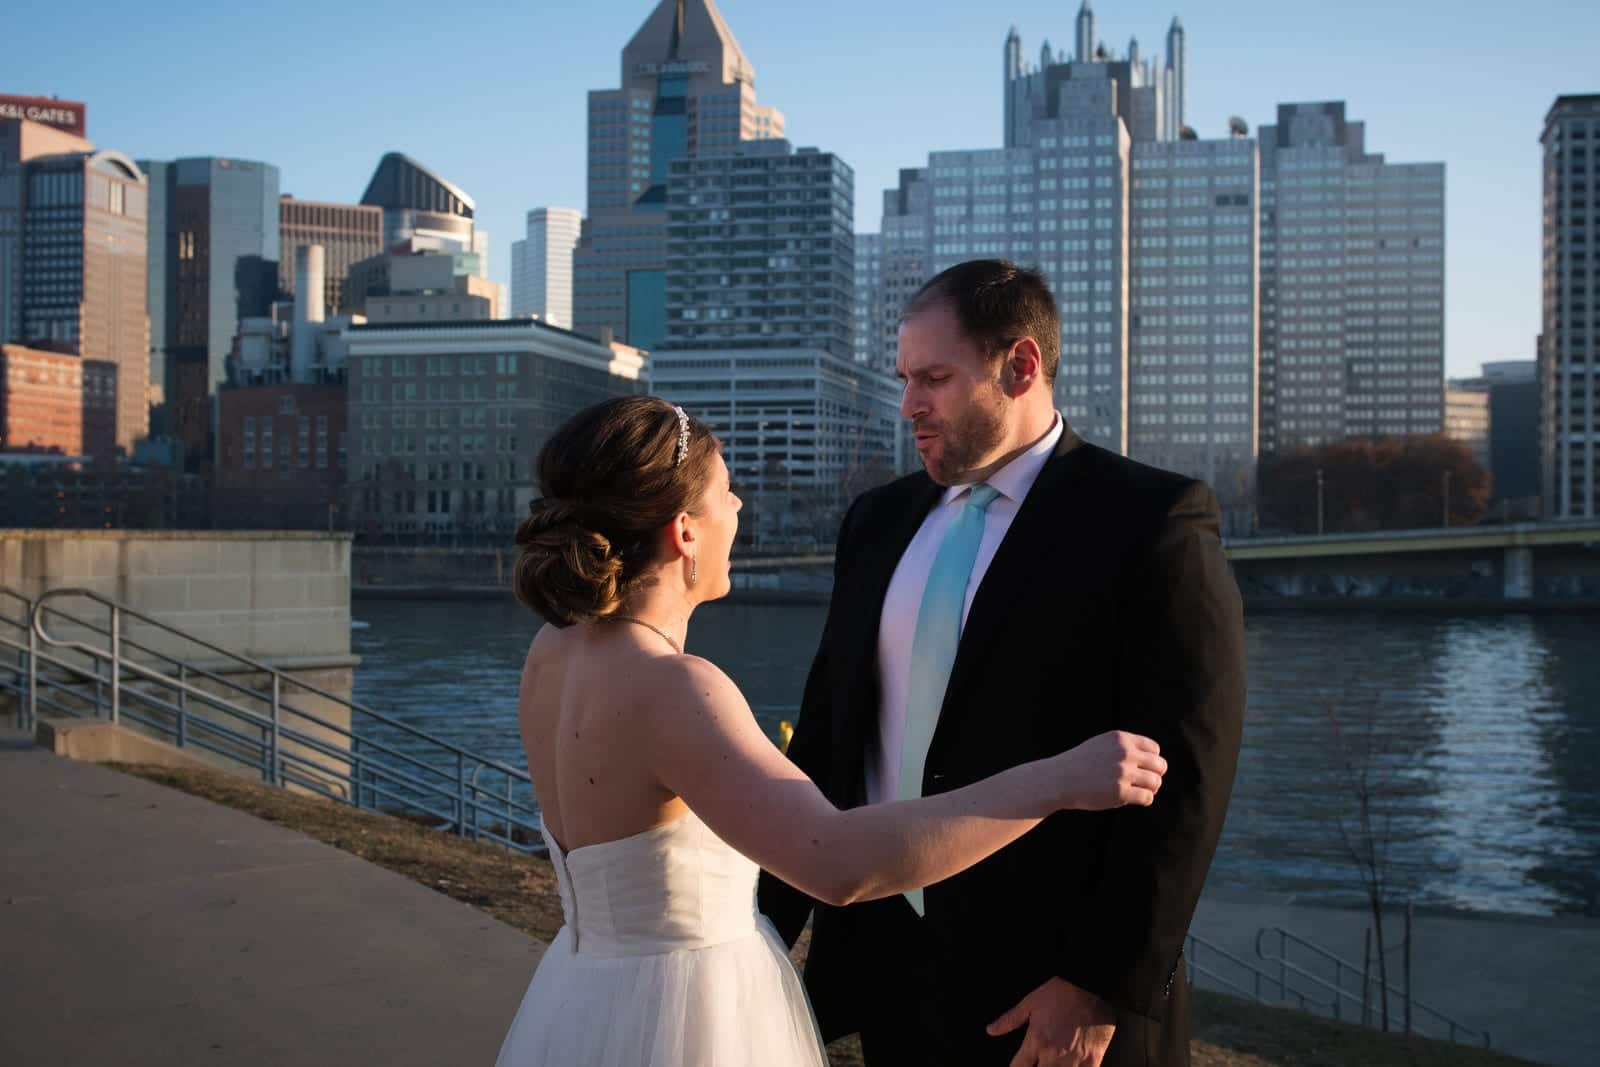 A groom whistles in approval as he turns to see his bride during their first look near PNC Park in Pittsburgh.